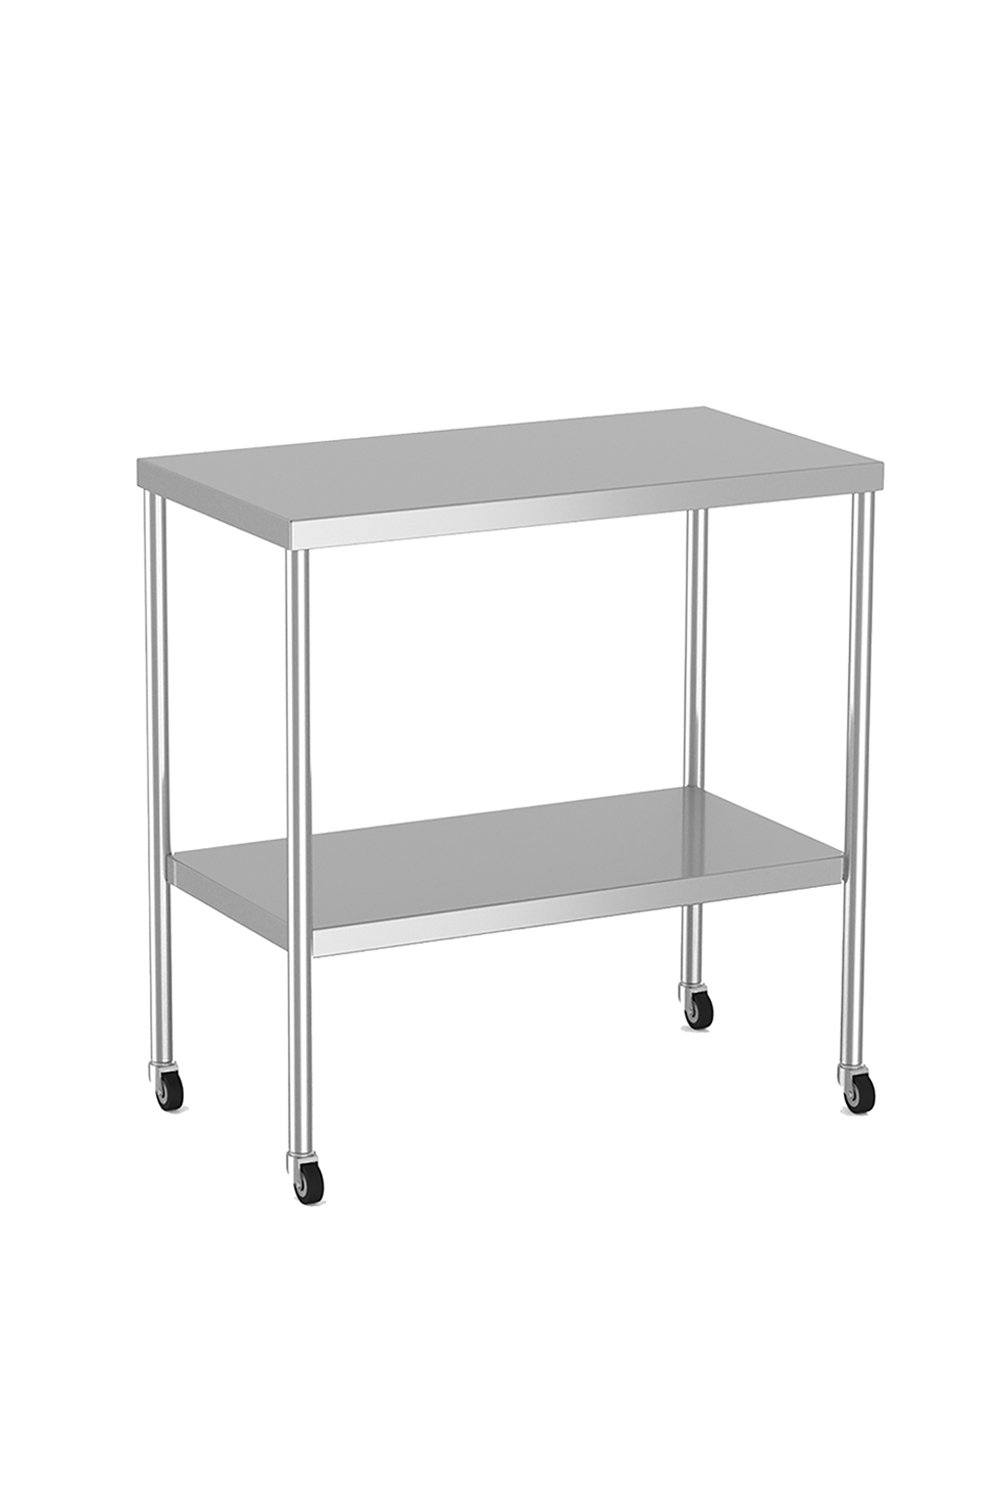 Stainless Steel Table Stainless Solutions Macmedical 18"D x 33"W x 34"H Under-shelf 